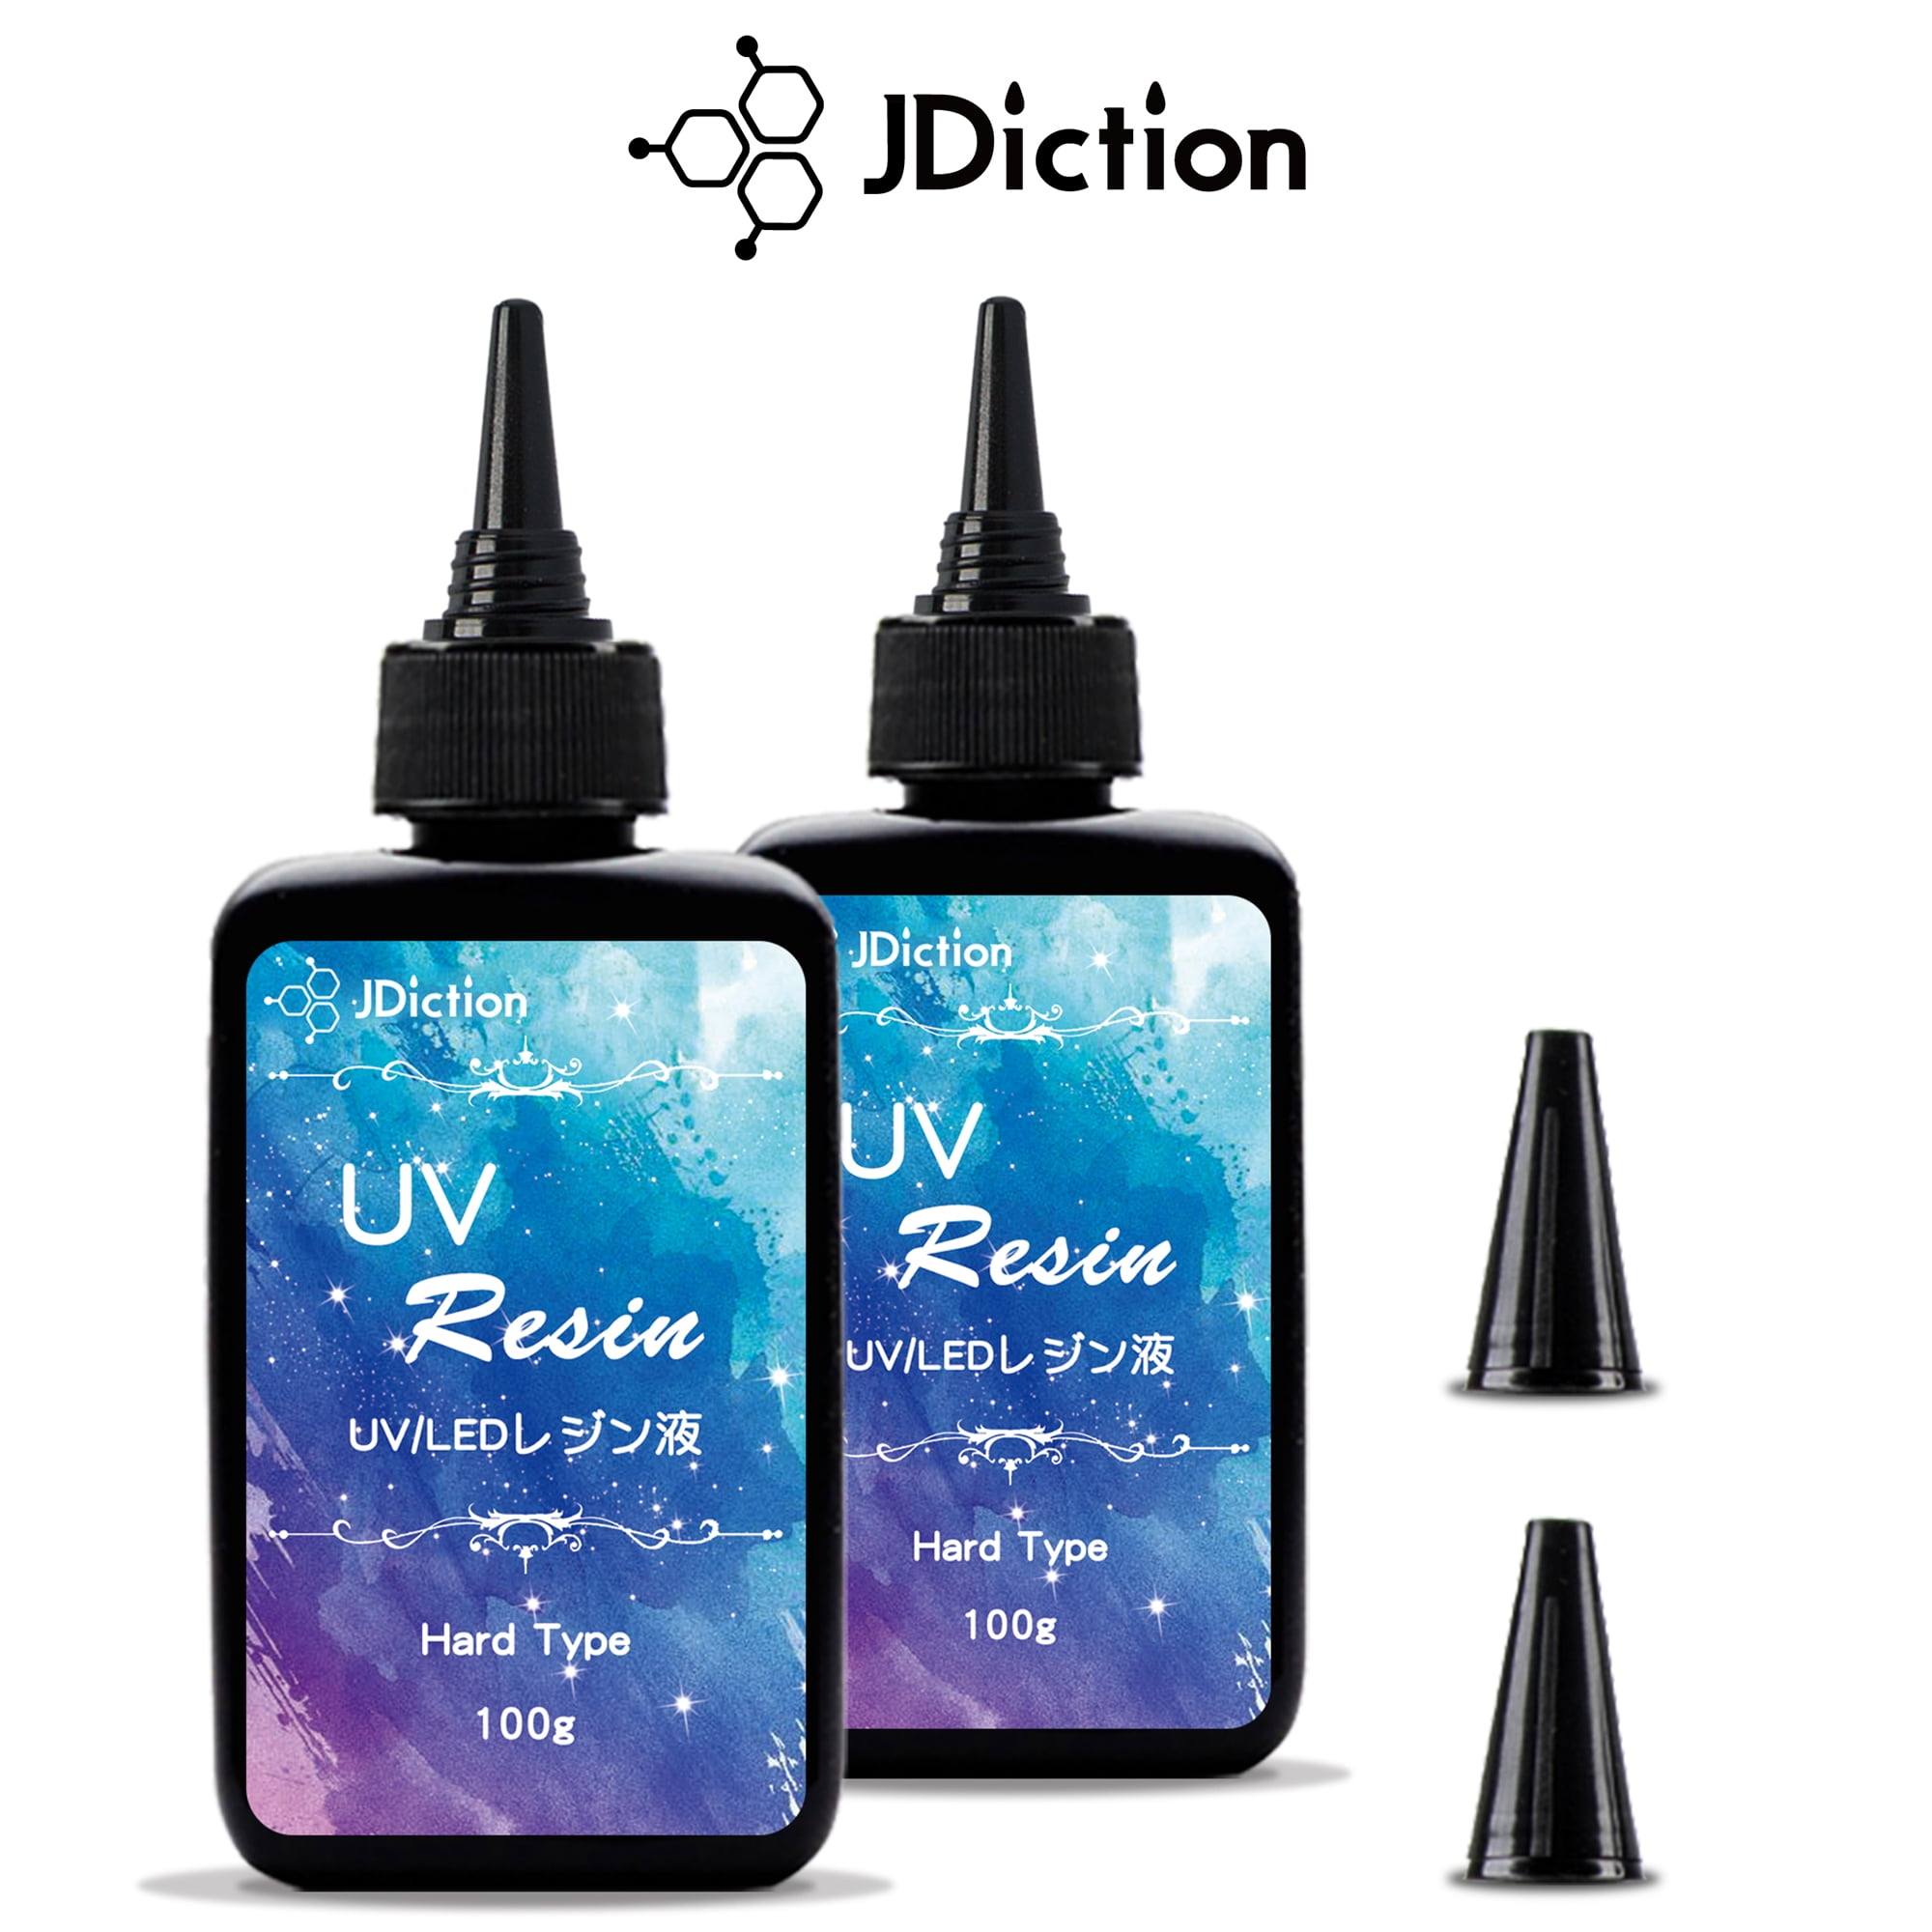 JDiction UV Resin Kit with Light, Crystal Clear Hard Nepal